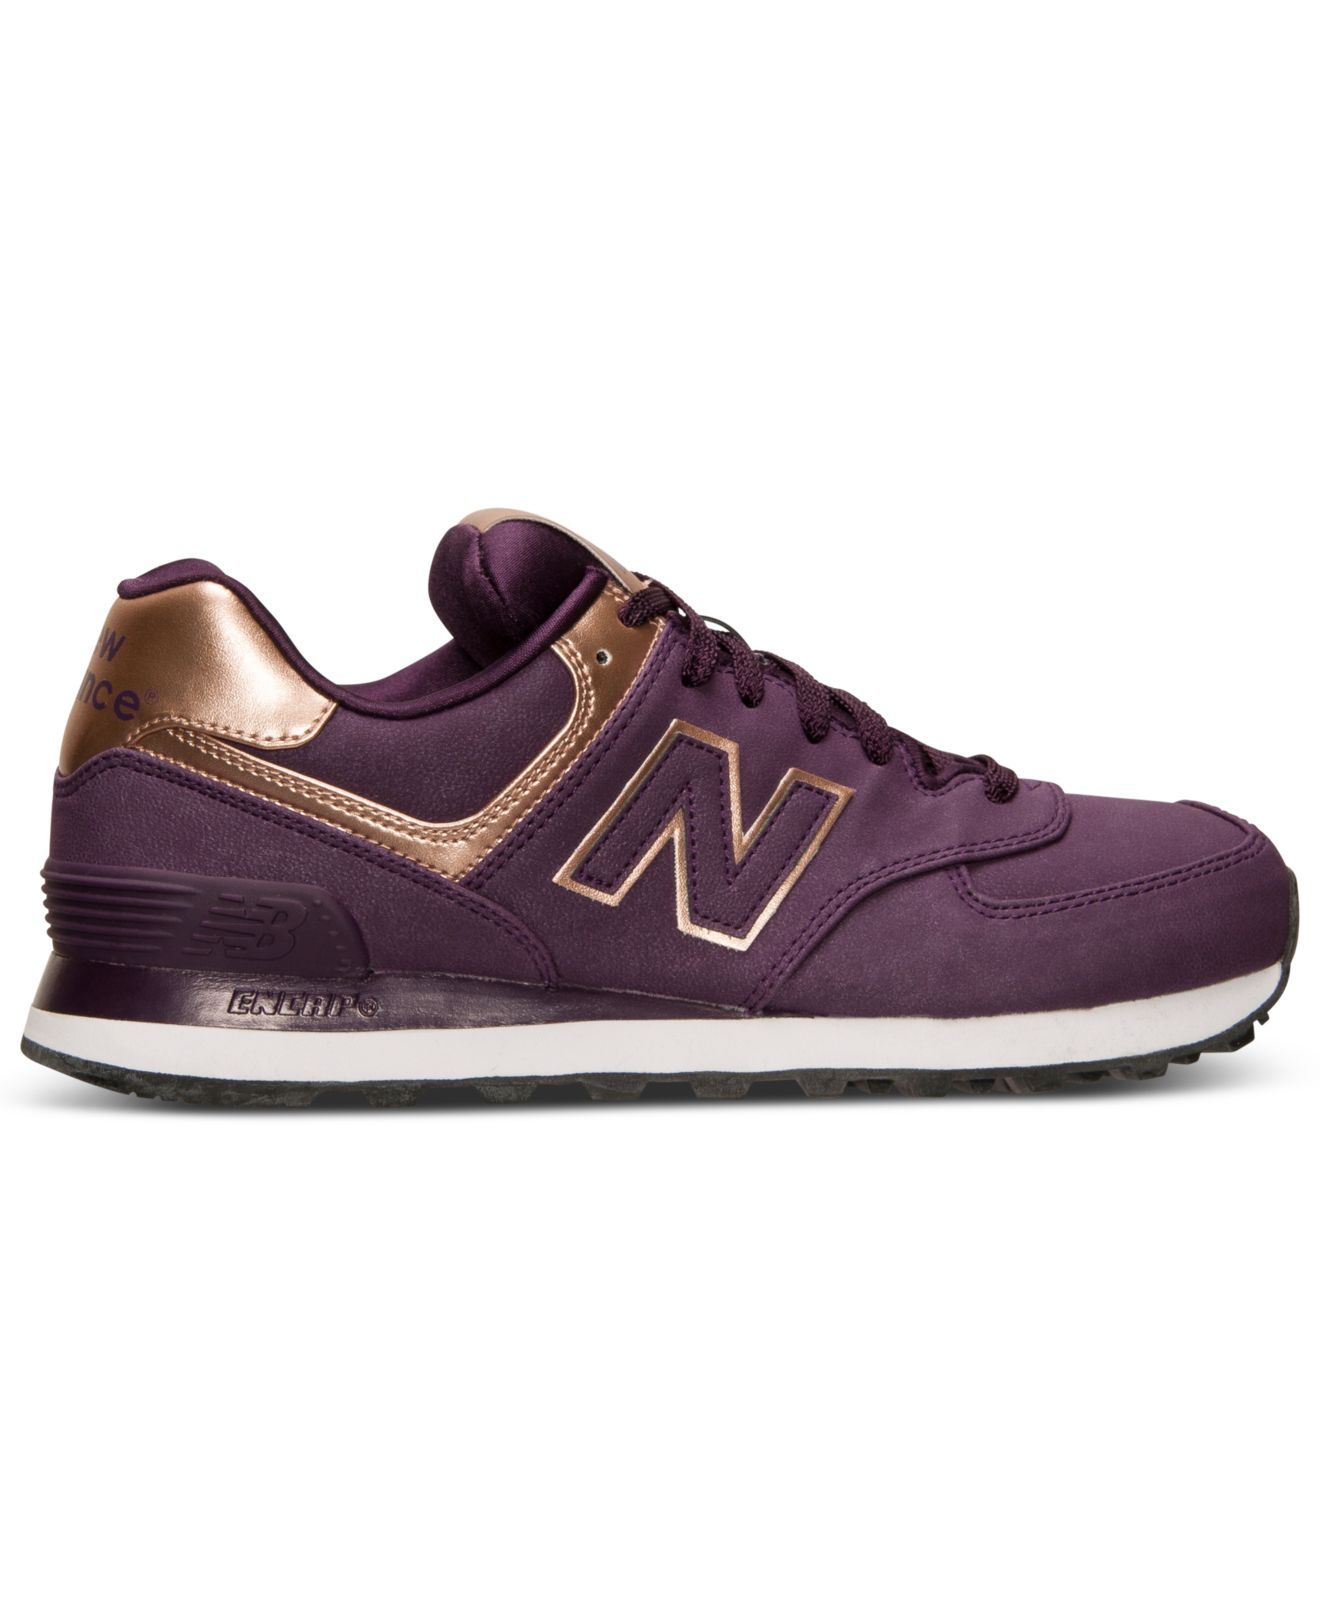 new balance women's 574 rose gold casual sneakers from finish line